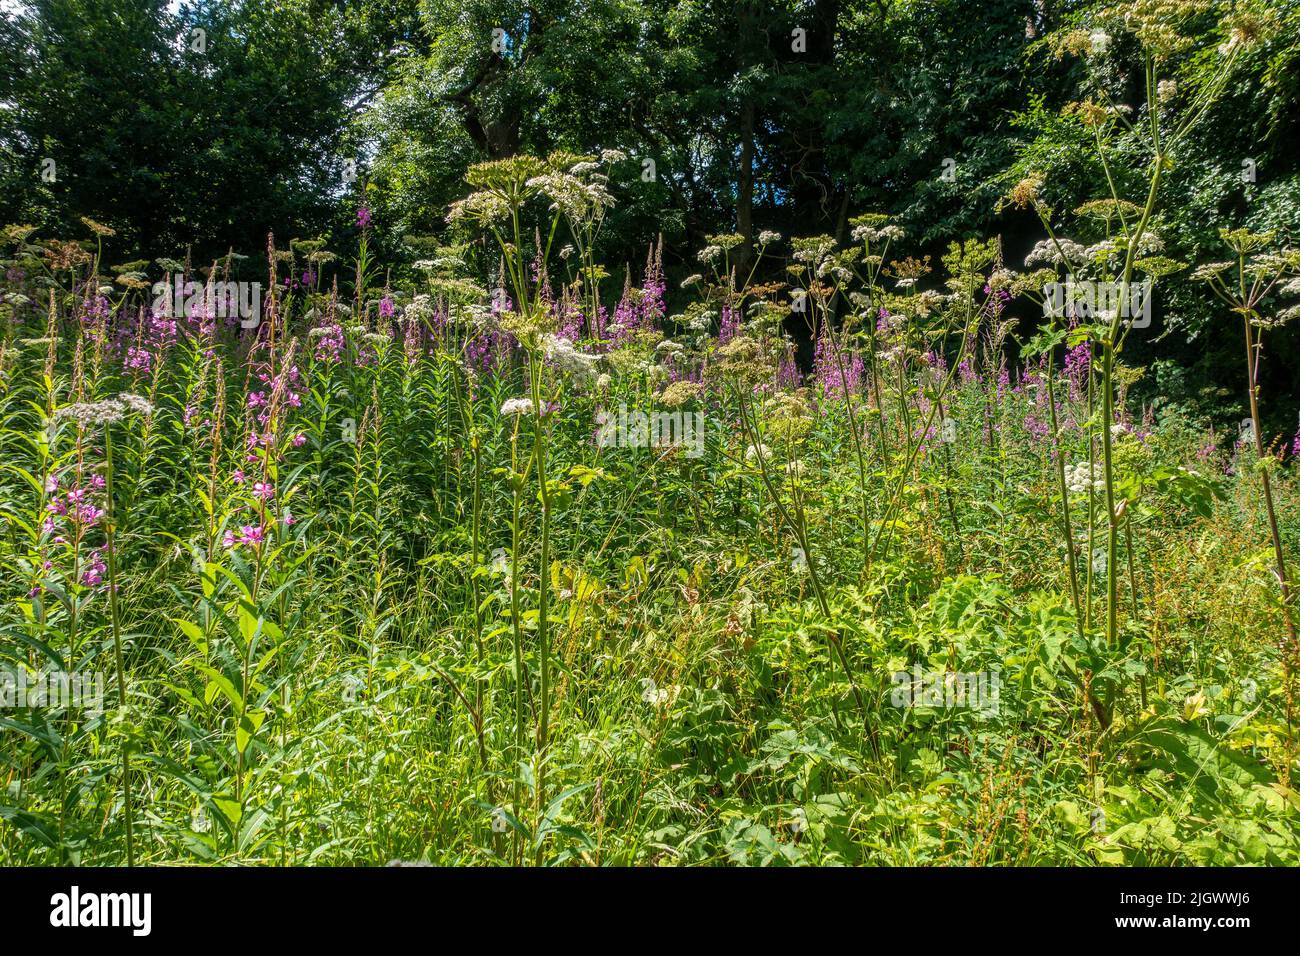 Wild Flowers,Growing on a bank,Brockhill Country Park,Saltwood,Hythe,Kent,England,UK Stock Photo